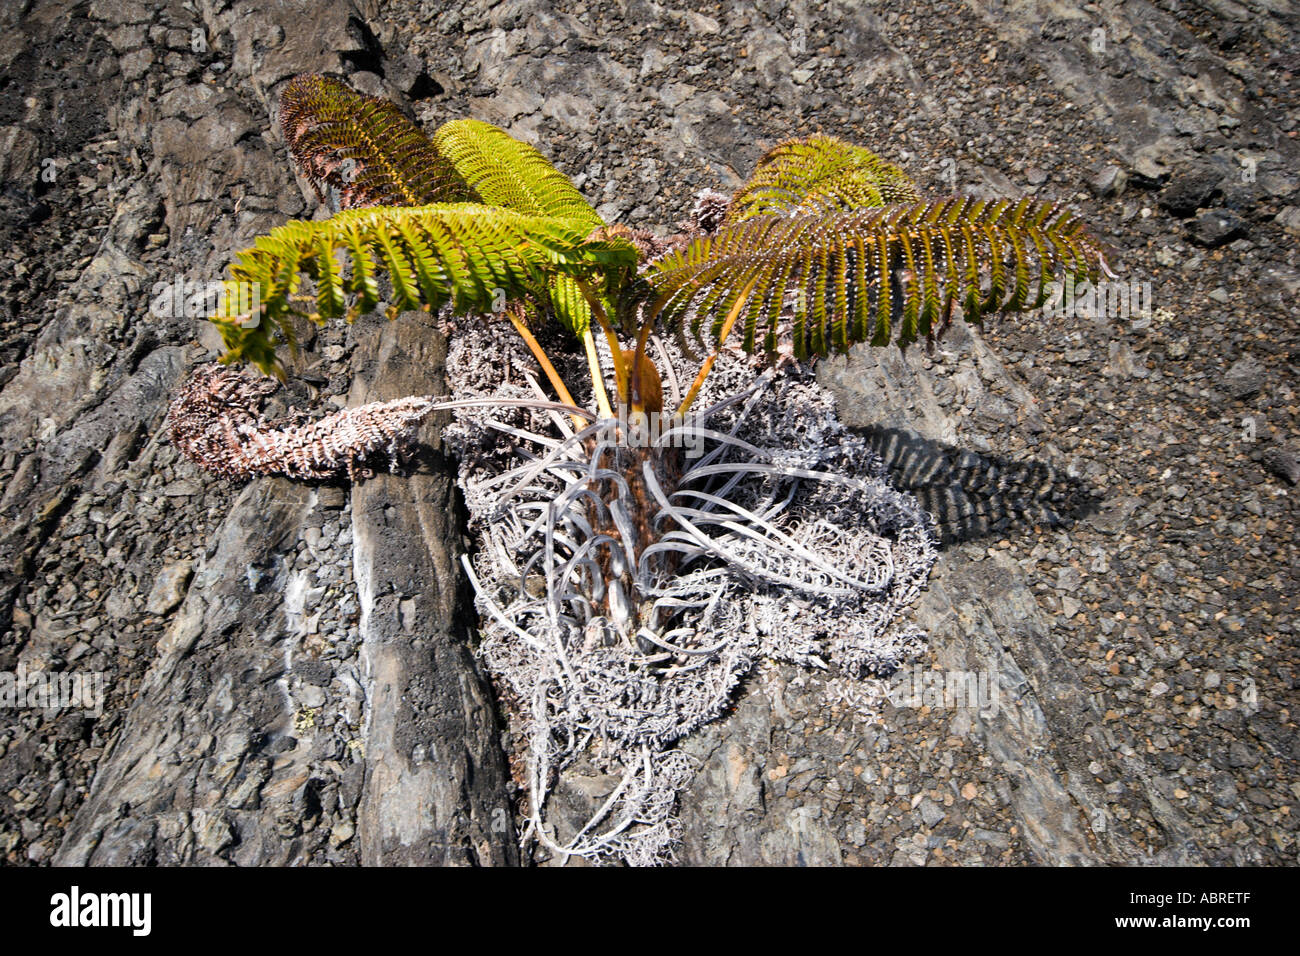 Young Hapu'u tree fern, growing in a 1974 pahoehoe lava flow, Hawai'i Volcanoes National Park Stock Photo